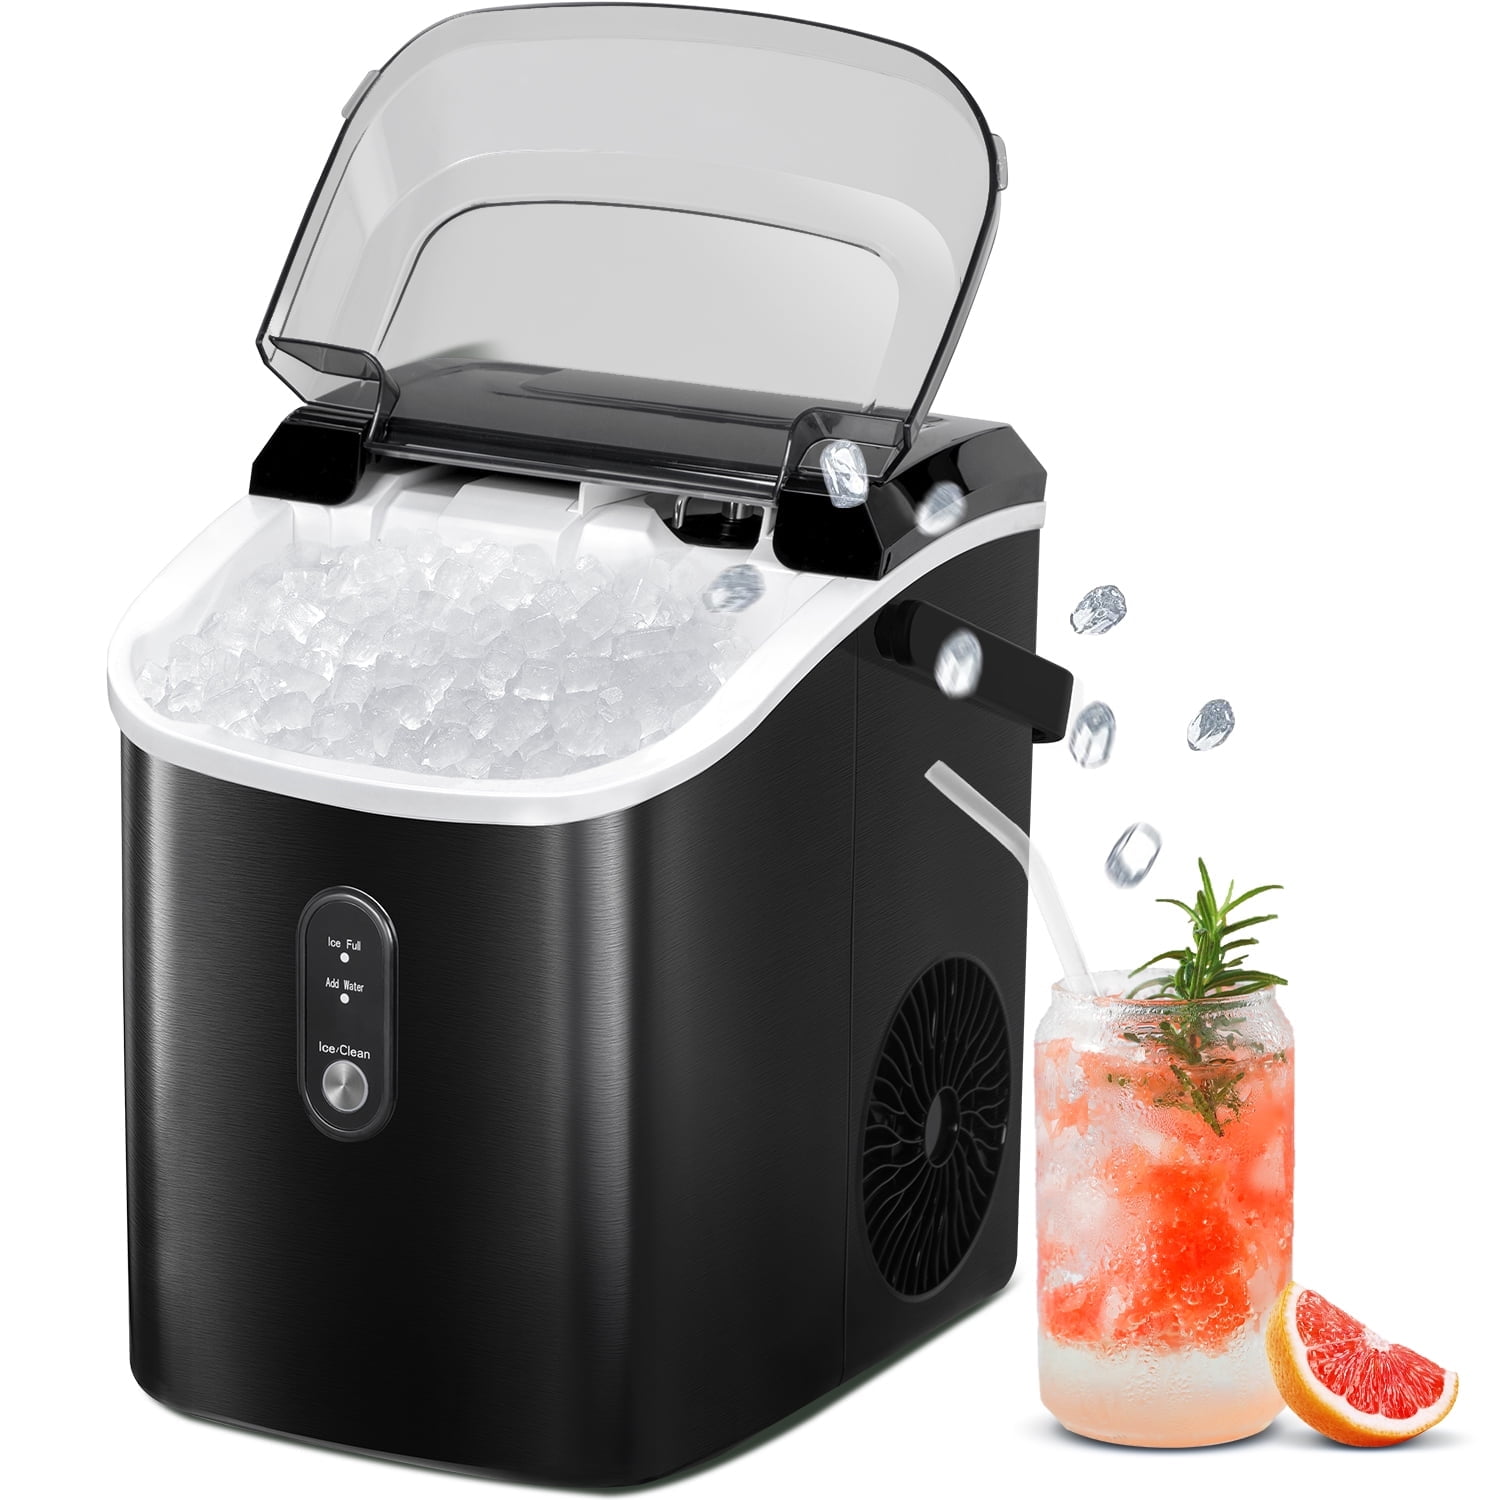 KISSAIR Portable Nugget Ice Maker Countertop, Self-Cleaning